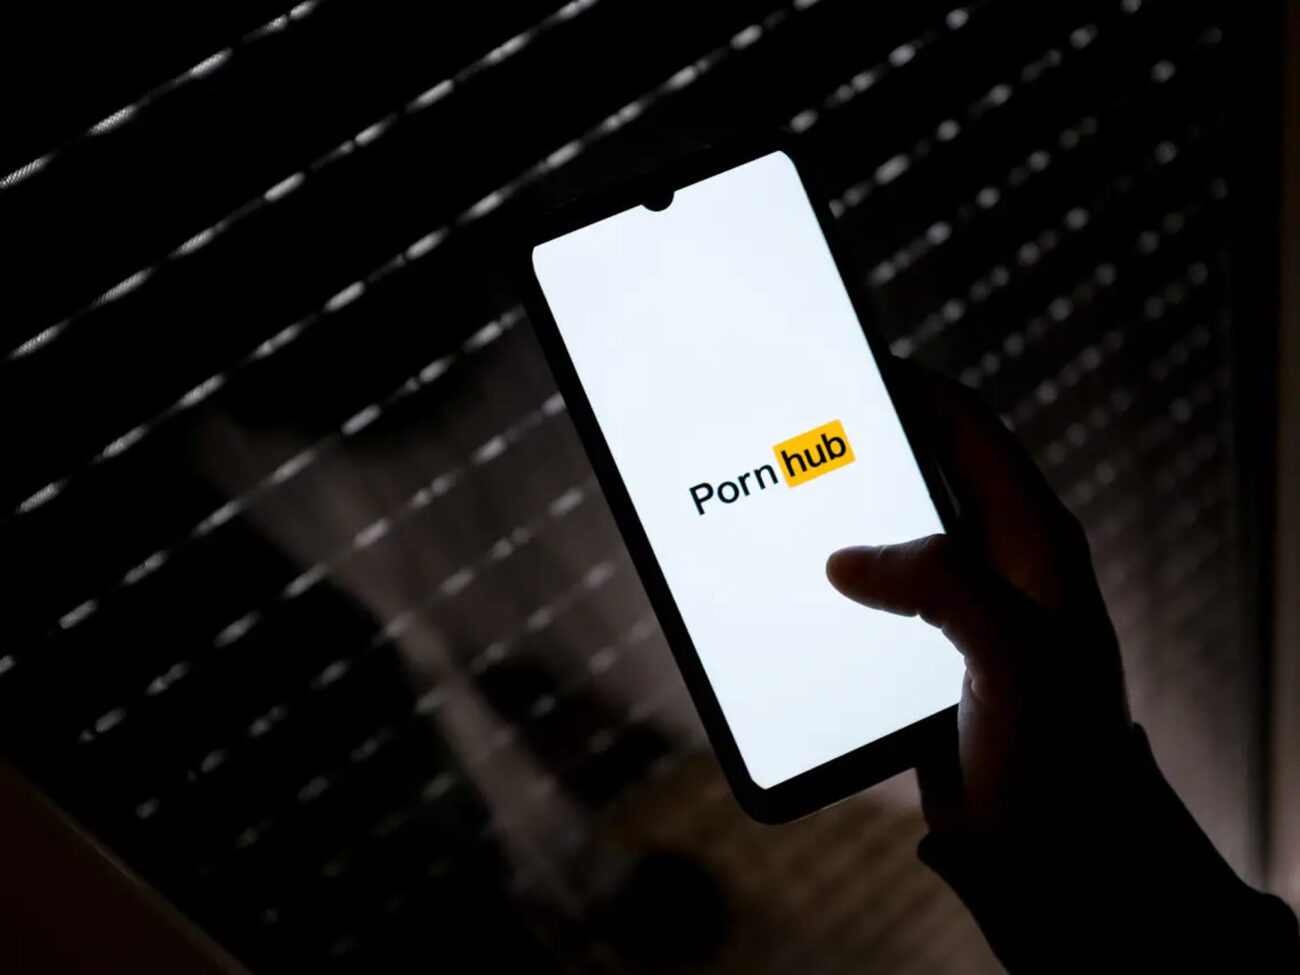 After an article alleged PornHub of sex trafficking and child porn, two top execs of the site’s parent company resigned. Uncover the MindGeek scandal now.